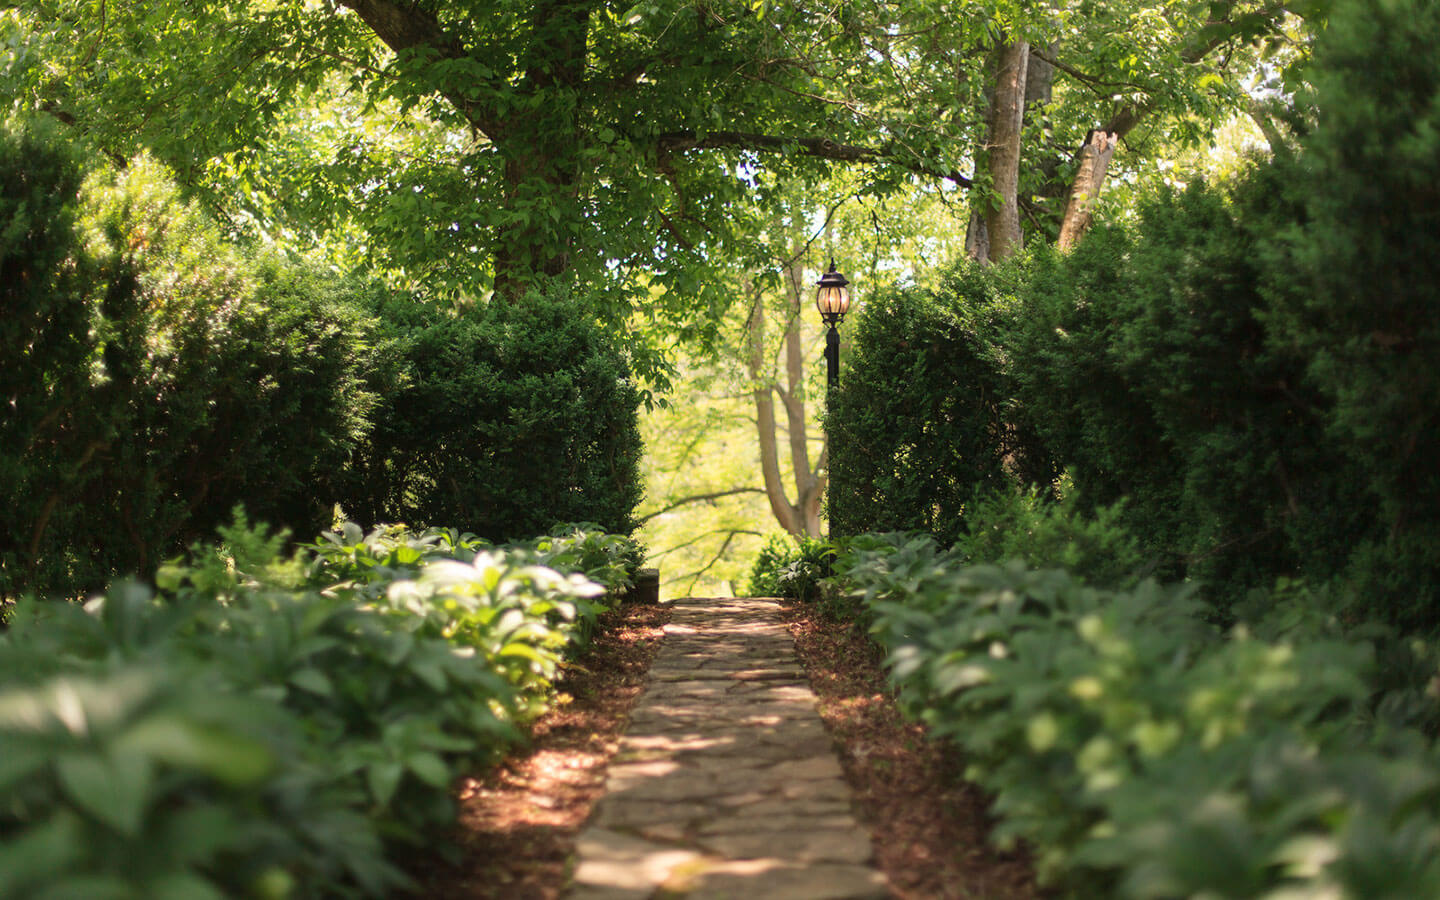 80 acres of natural trails at our historic Virginia bed and breakfast